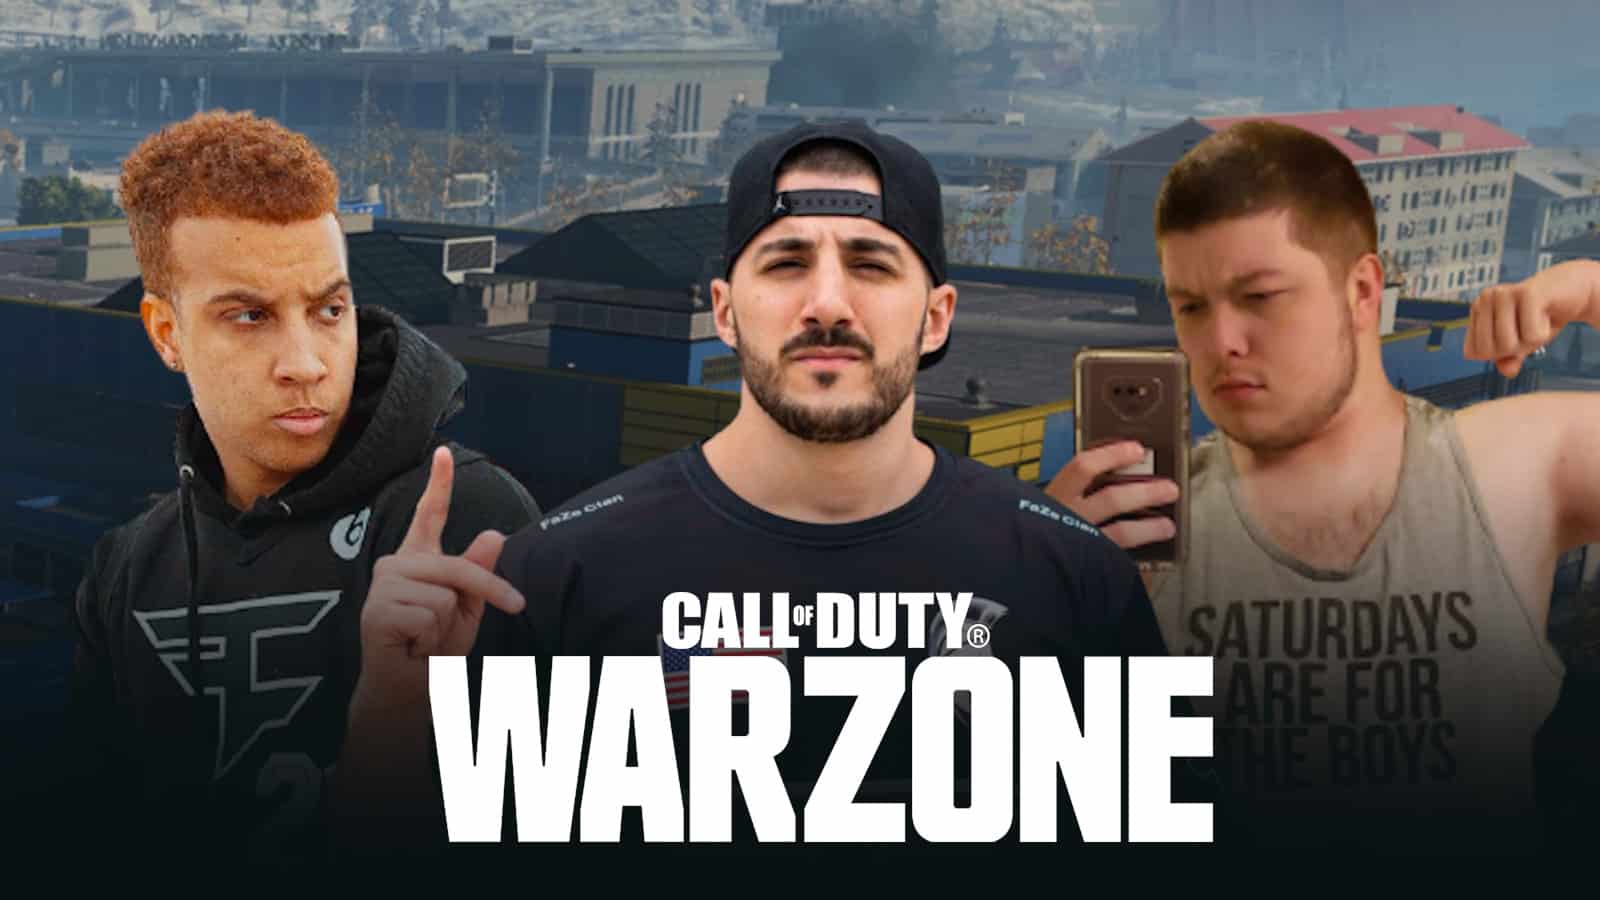 5 best Warzone streamers you should be following to improve